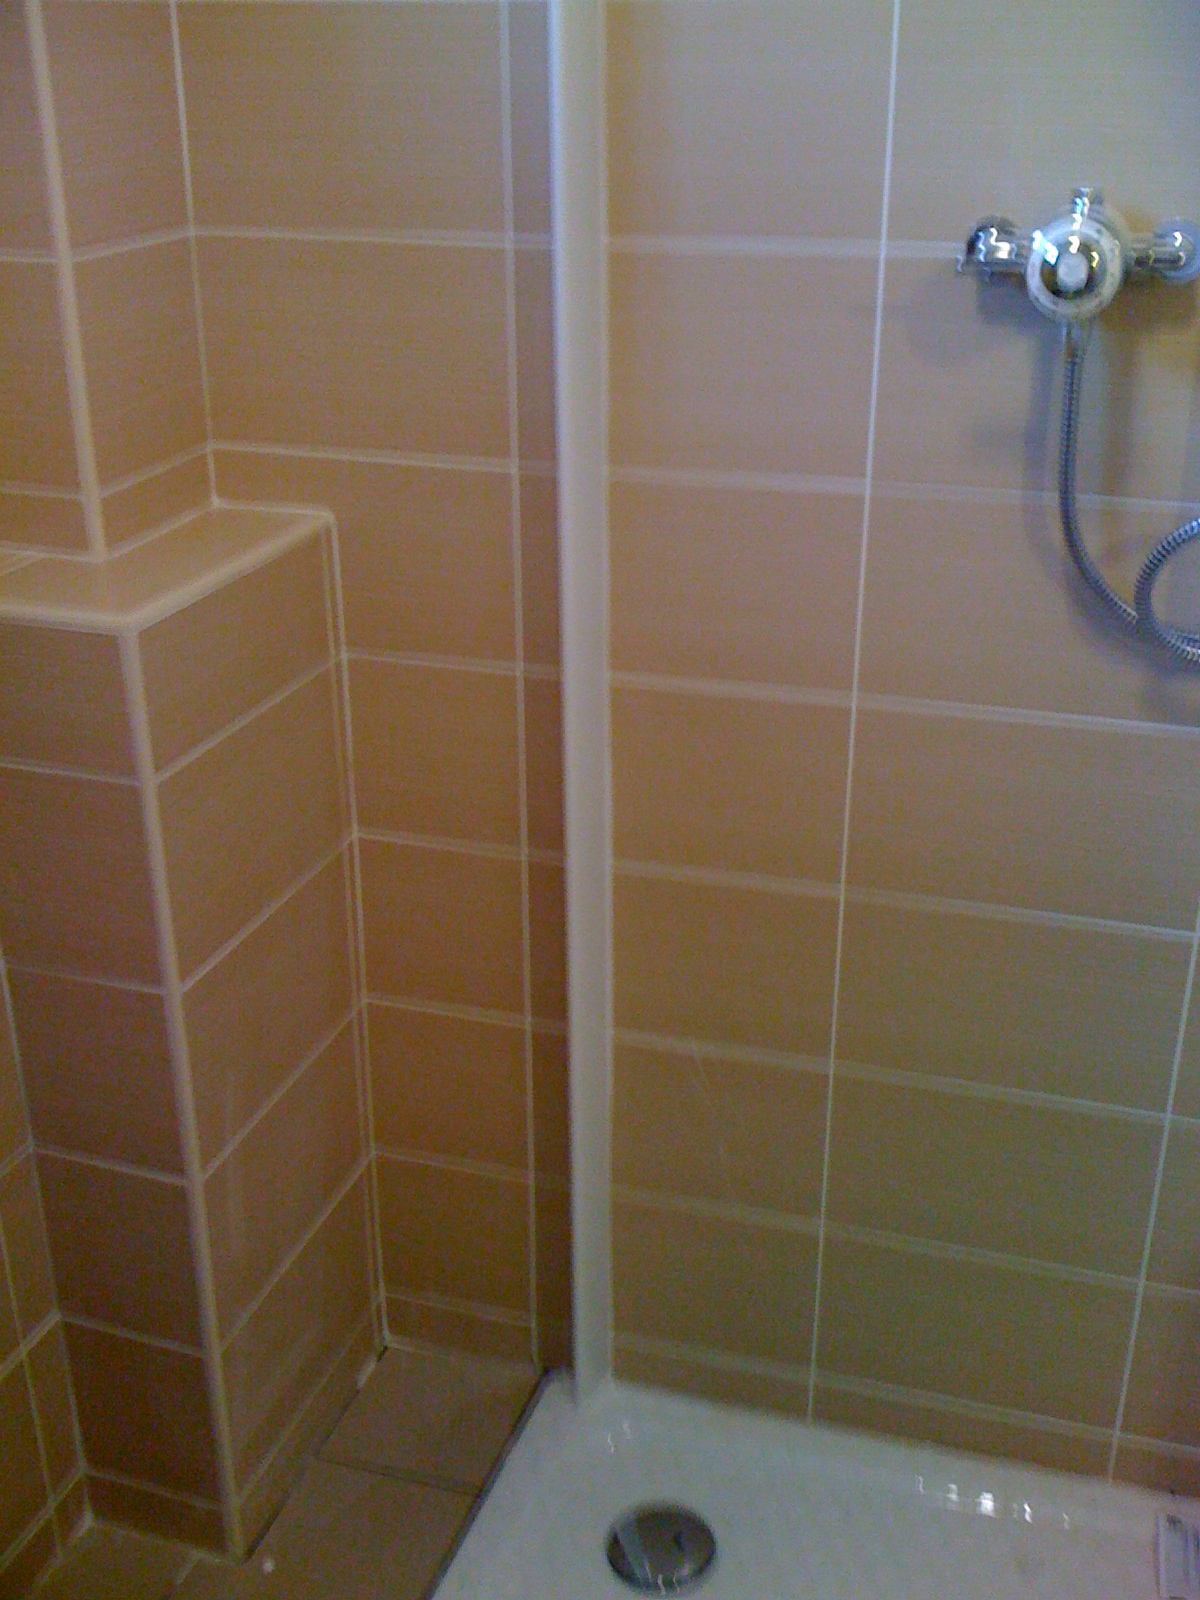 Splashblade are now producing a 2 metre length Splashblade, suitable for walk in showers that still require a shower curtain due to health and safety issues. The back of the new 2 metre length also has keyhole fixing allowing it to be screwed to the wall as well as having the option with the  strong adhesive tape  giving the end user the option in fixing.